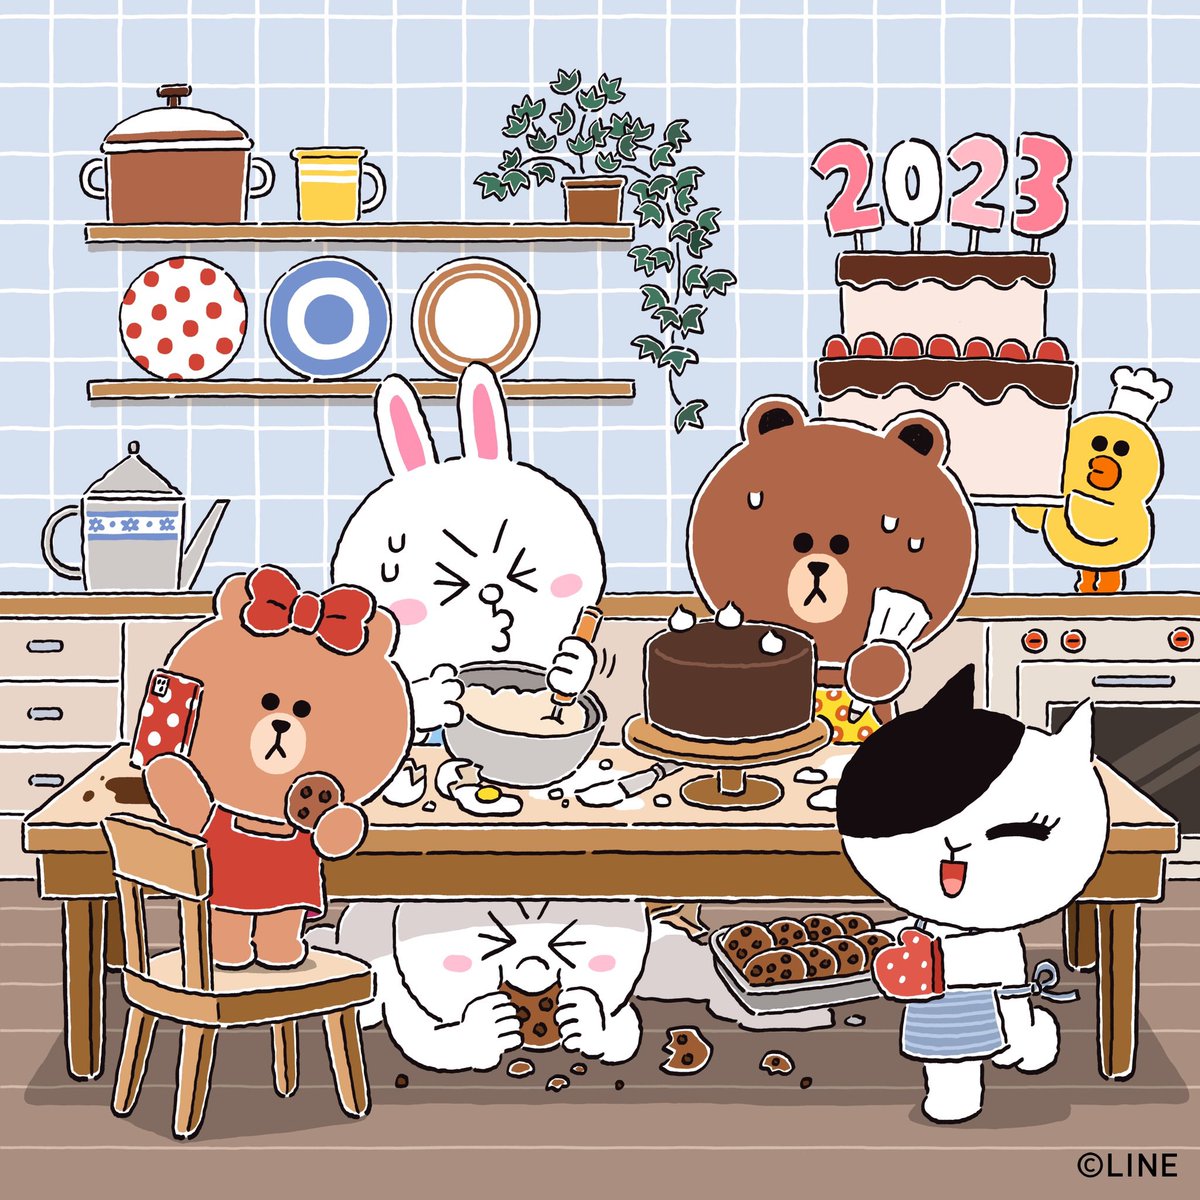 LINE FRIENDS, today’s pastry chefs🧑‍🍳

Made a little cakes and cookies🎂🍪
Baked them just for year end parties🎶

#BROWN #CONY #SALLY #CHOCO #MOON #JESSICA #LINEFRIENDS #baking #cakes #cookies #yearend #yearendparty #holiday #holidayparty #holidayrecipes